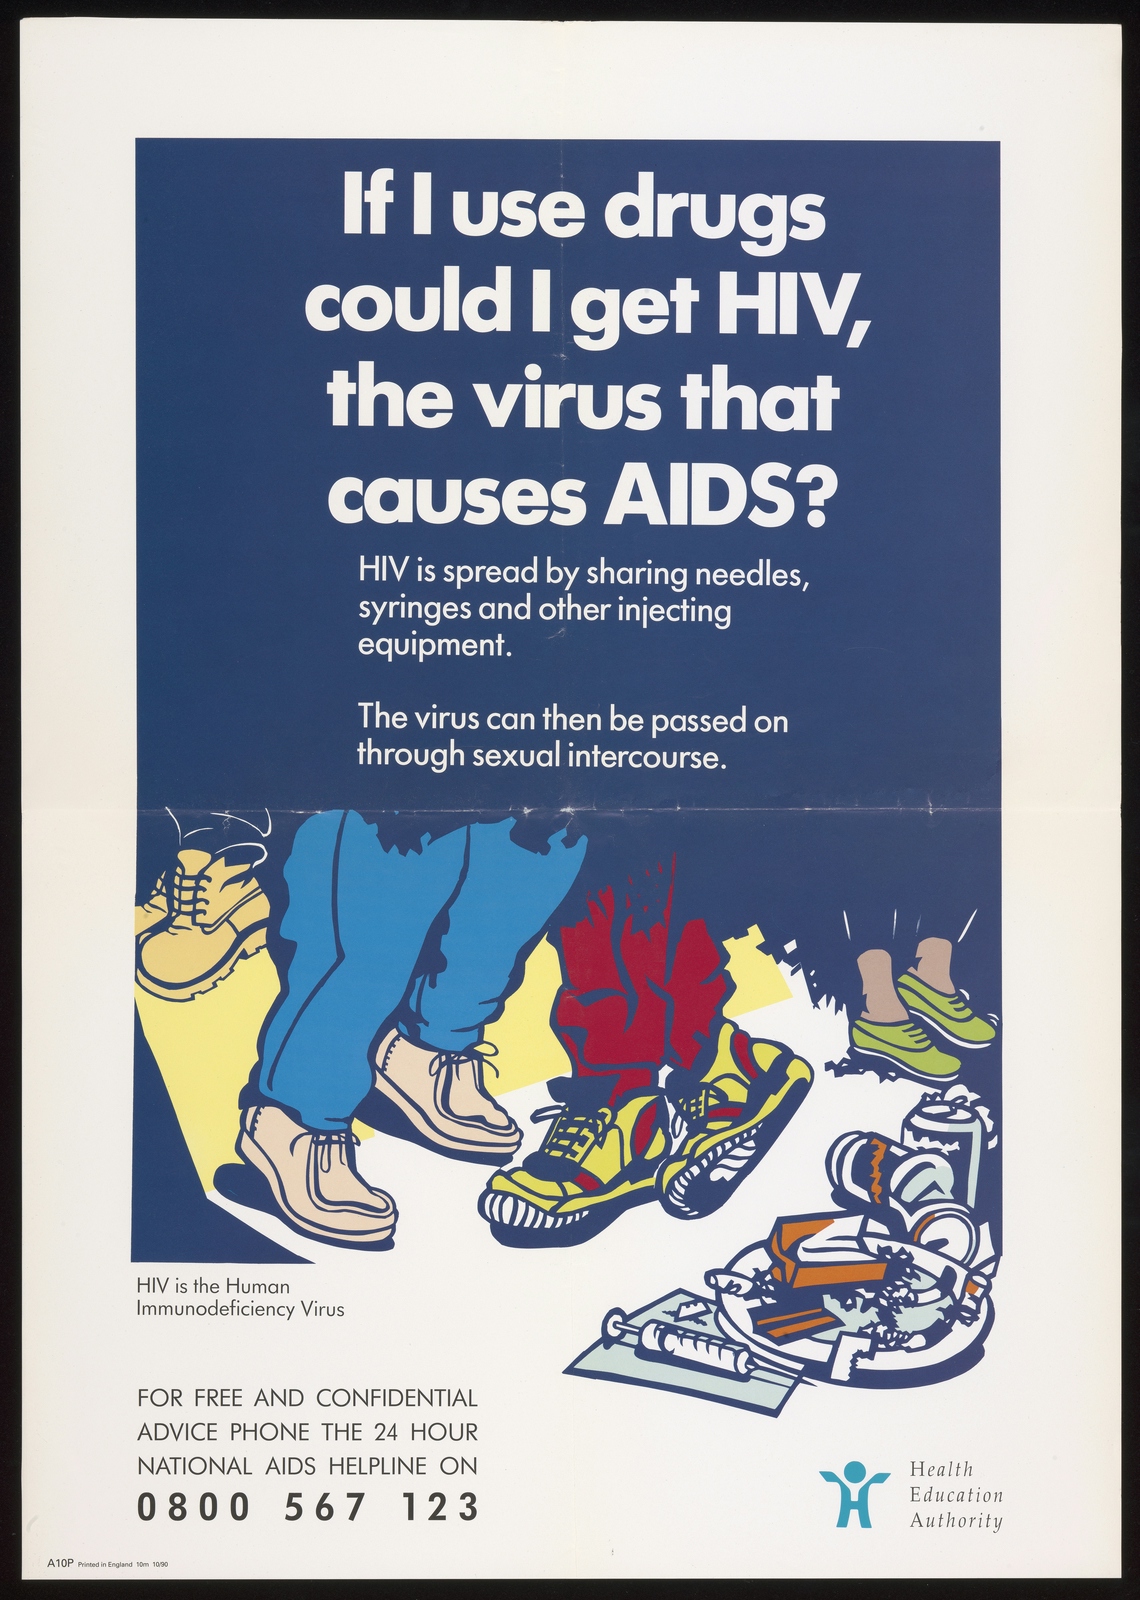 HIV  and drugs advice poster from the Health Education Authority, including a helpline telephone number.